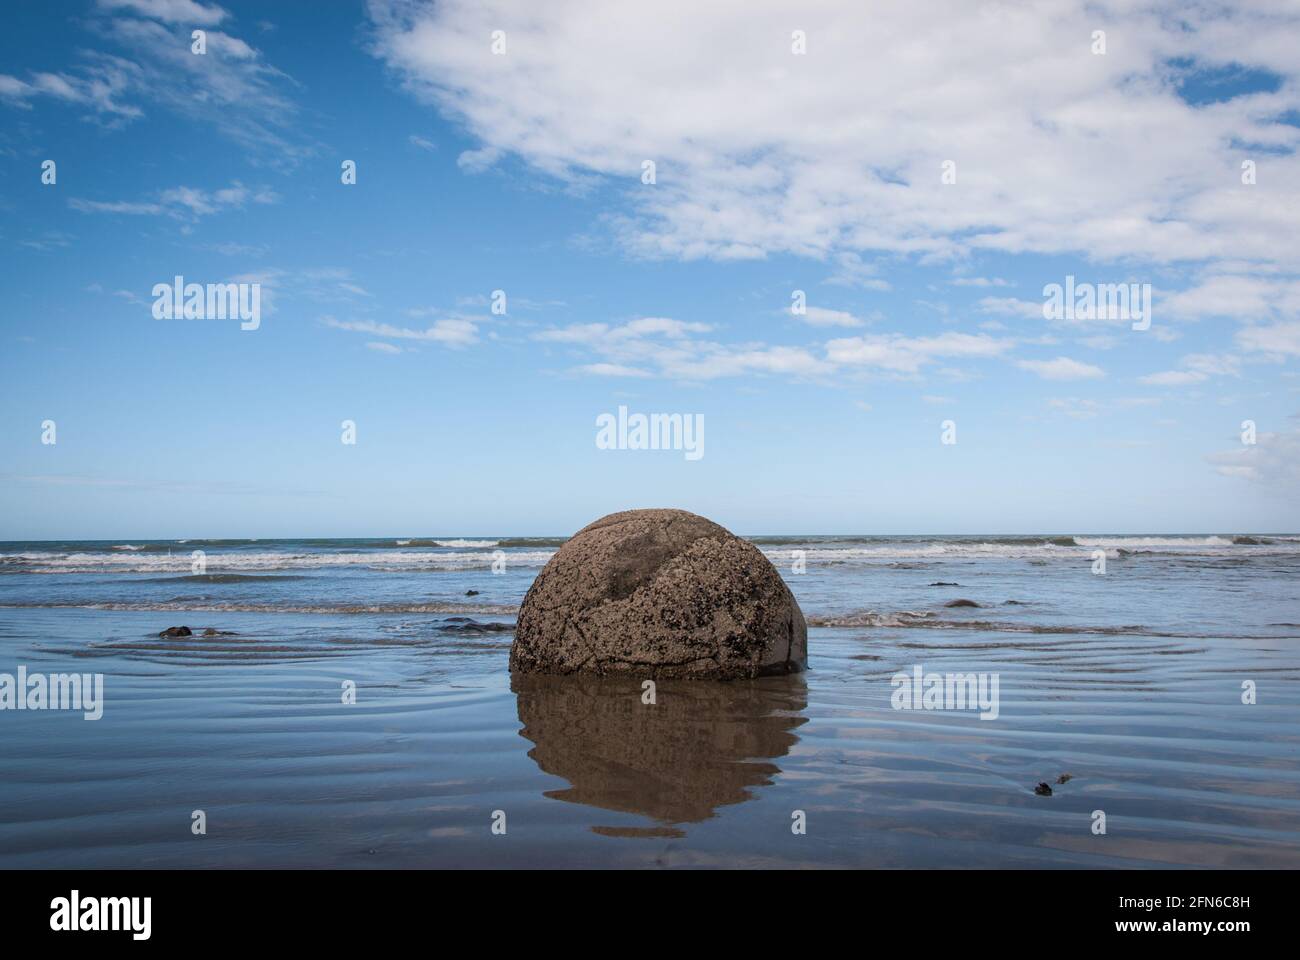 One of the Moeraki Boulders in the surf zone at Koekohe Beach on New Zealand's South Island. Stock Photo